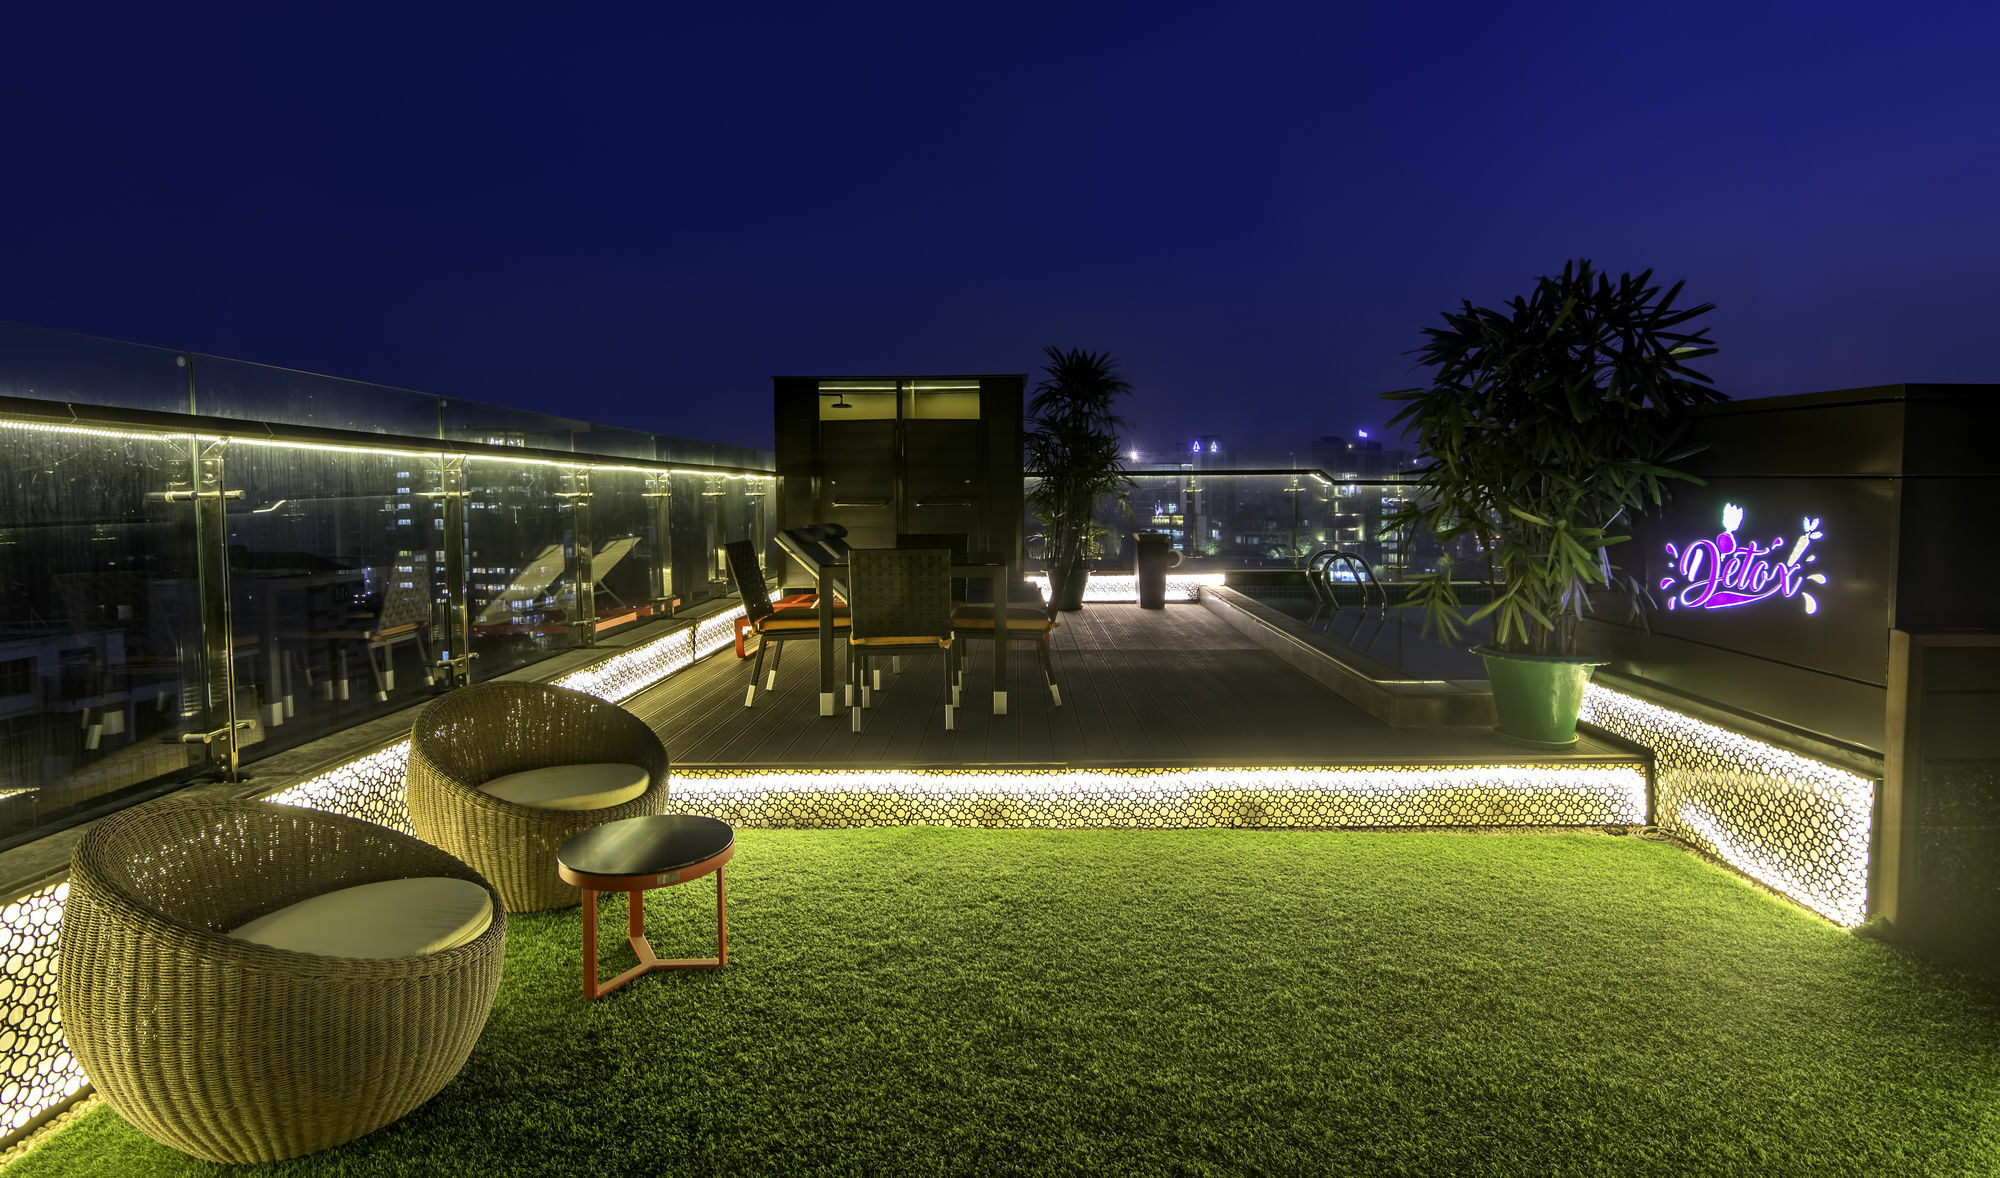 The Raintree Dhaka - A Luxury Collection Hotel Exterior foto